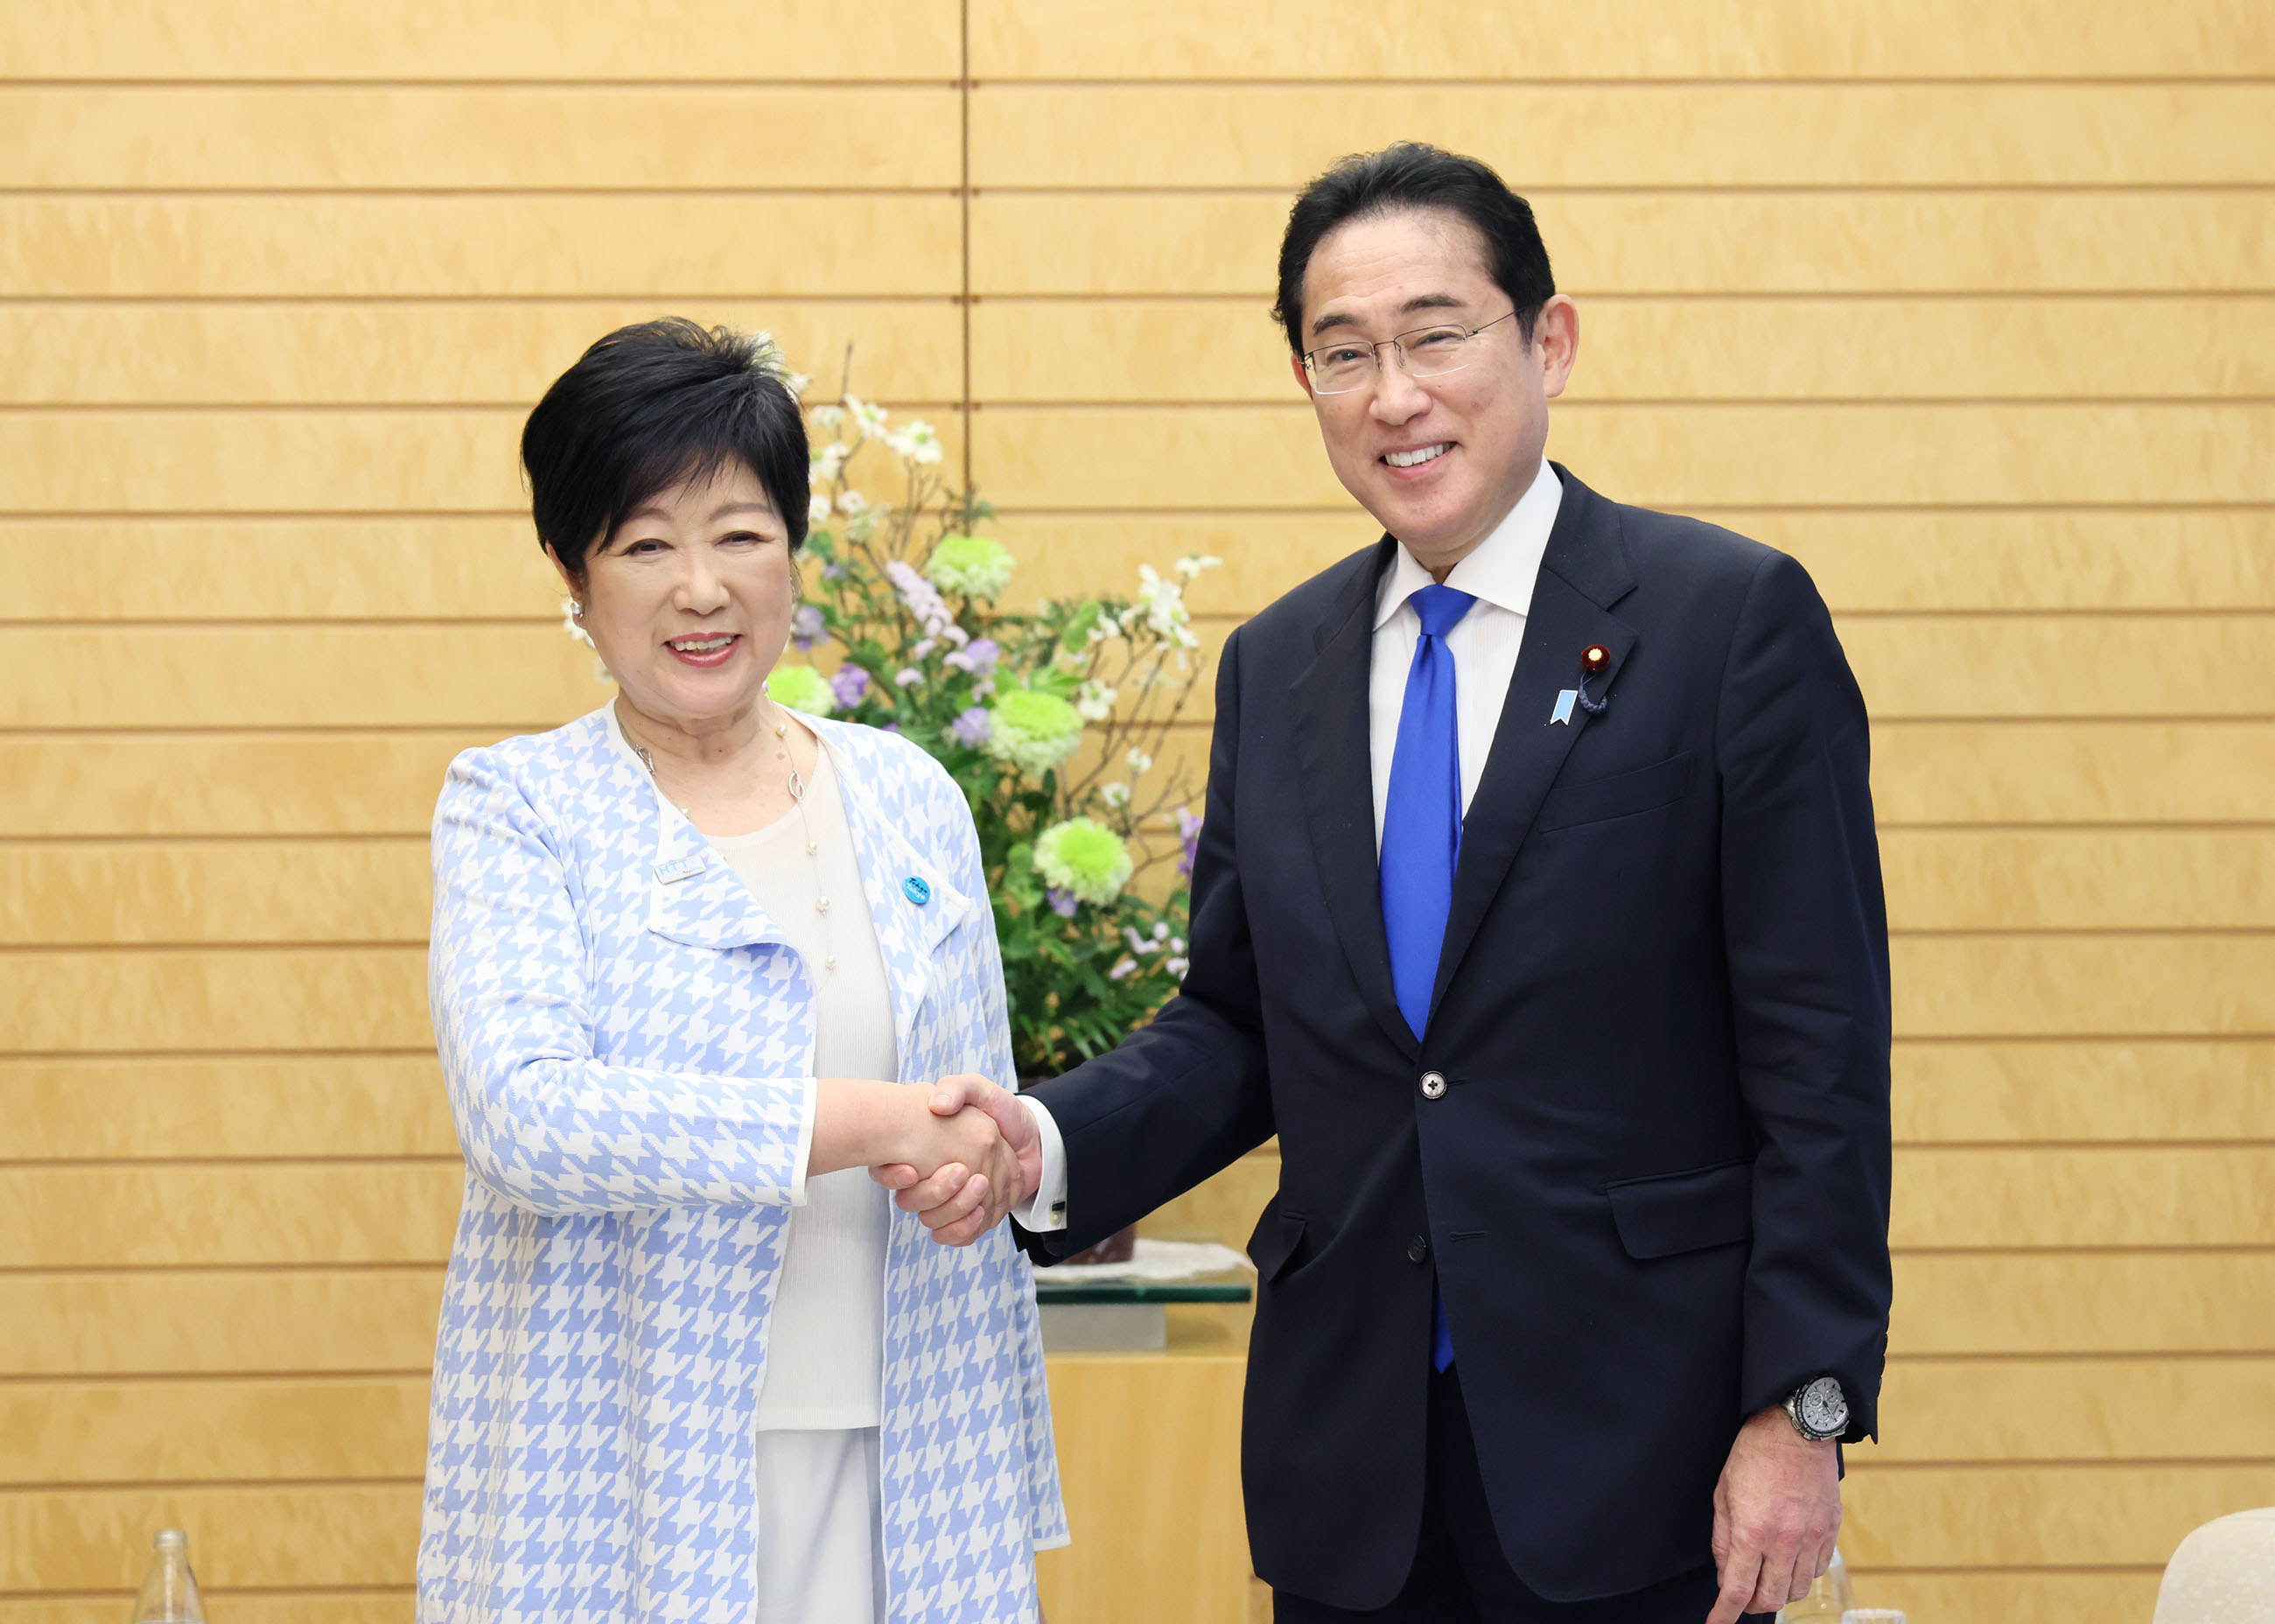 Meeting with the Governor of Tokyo